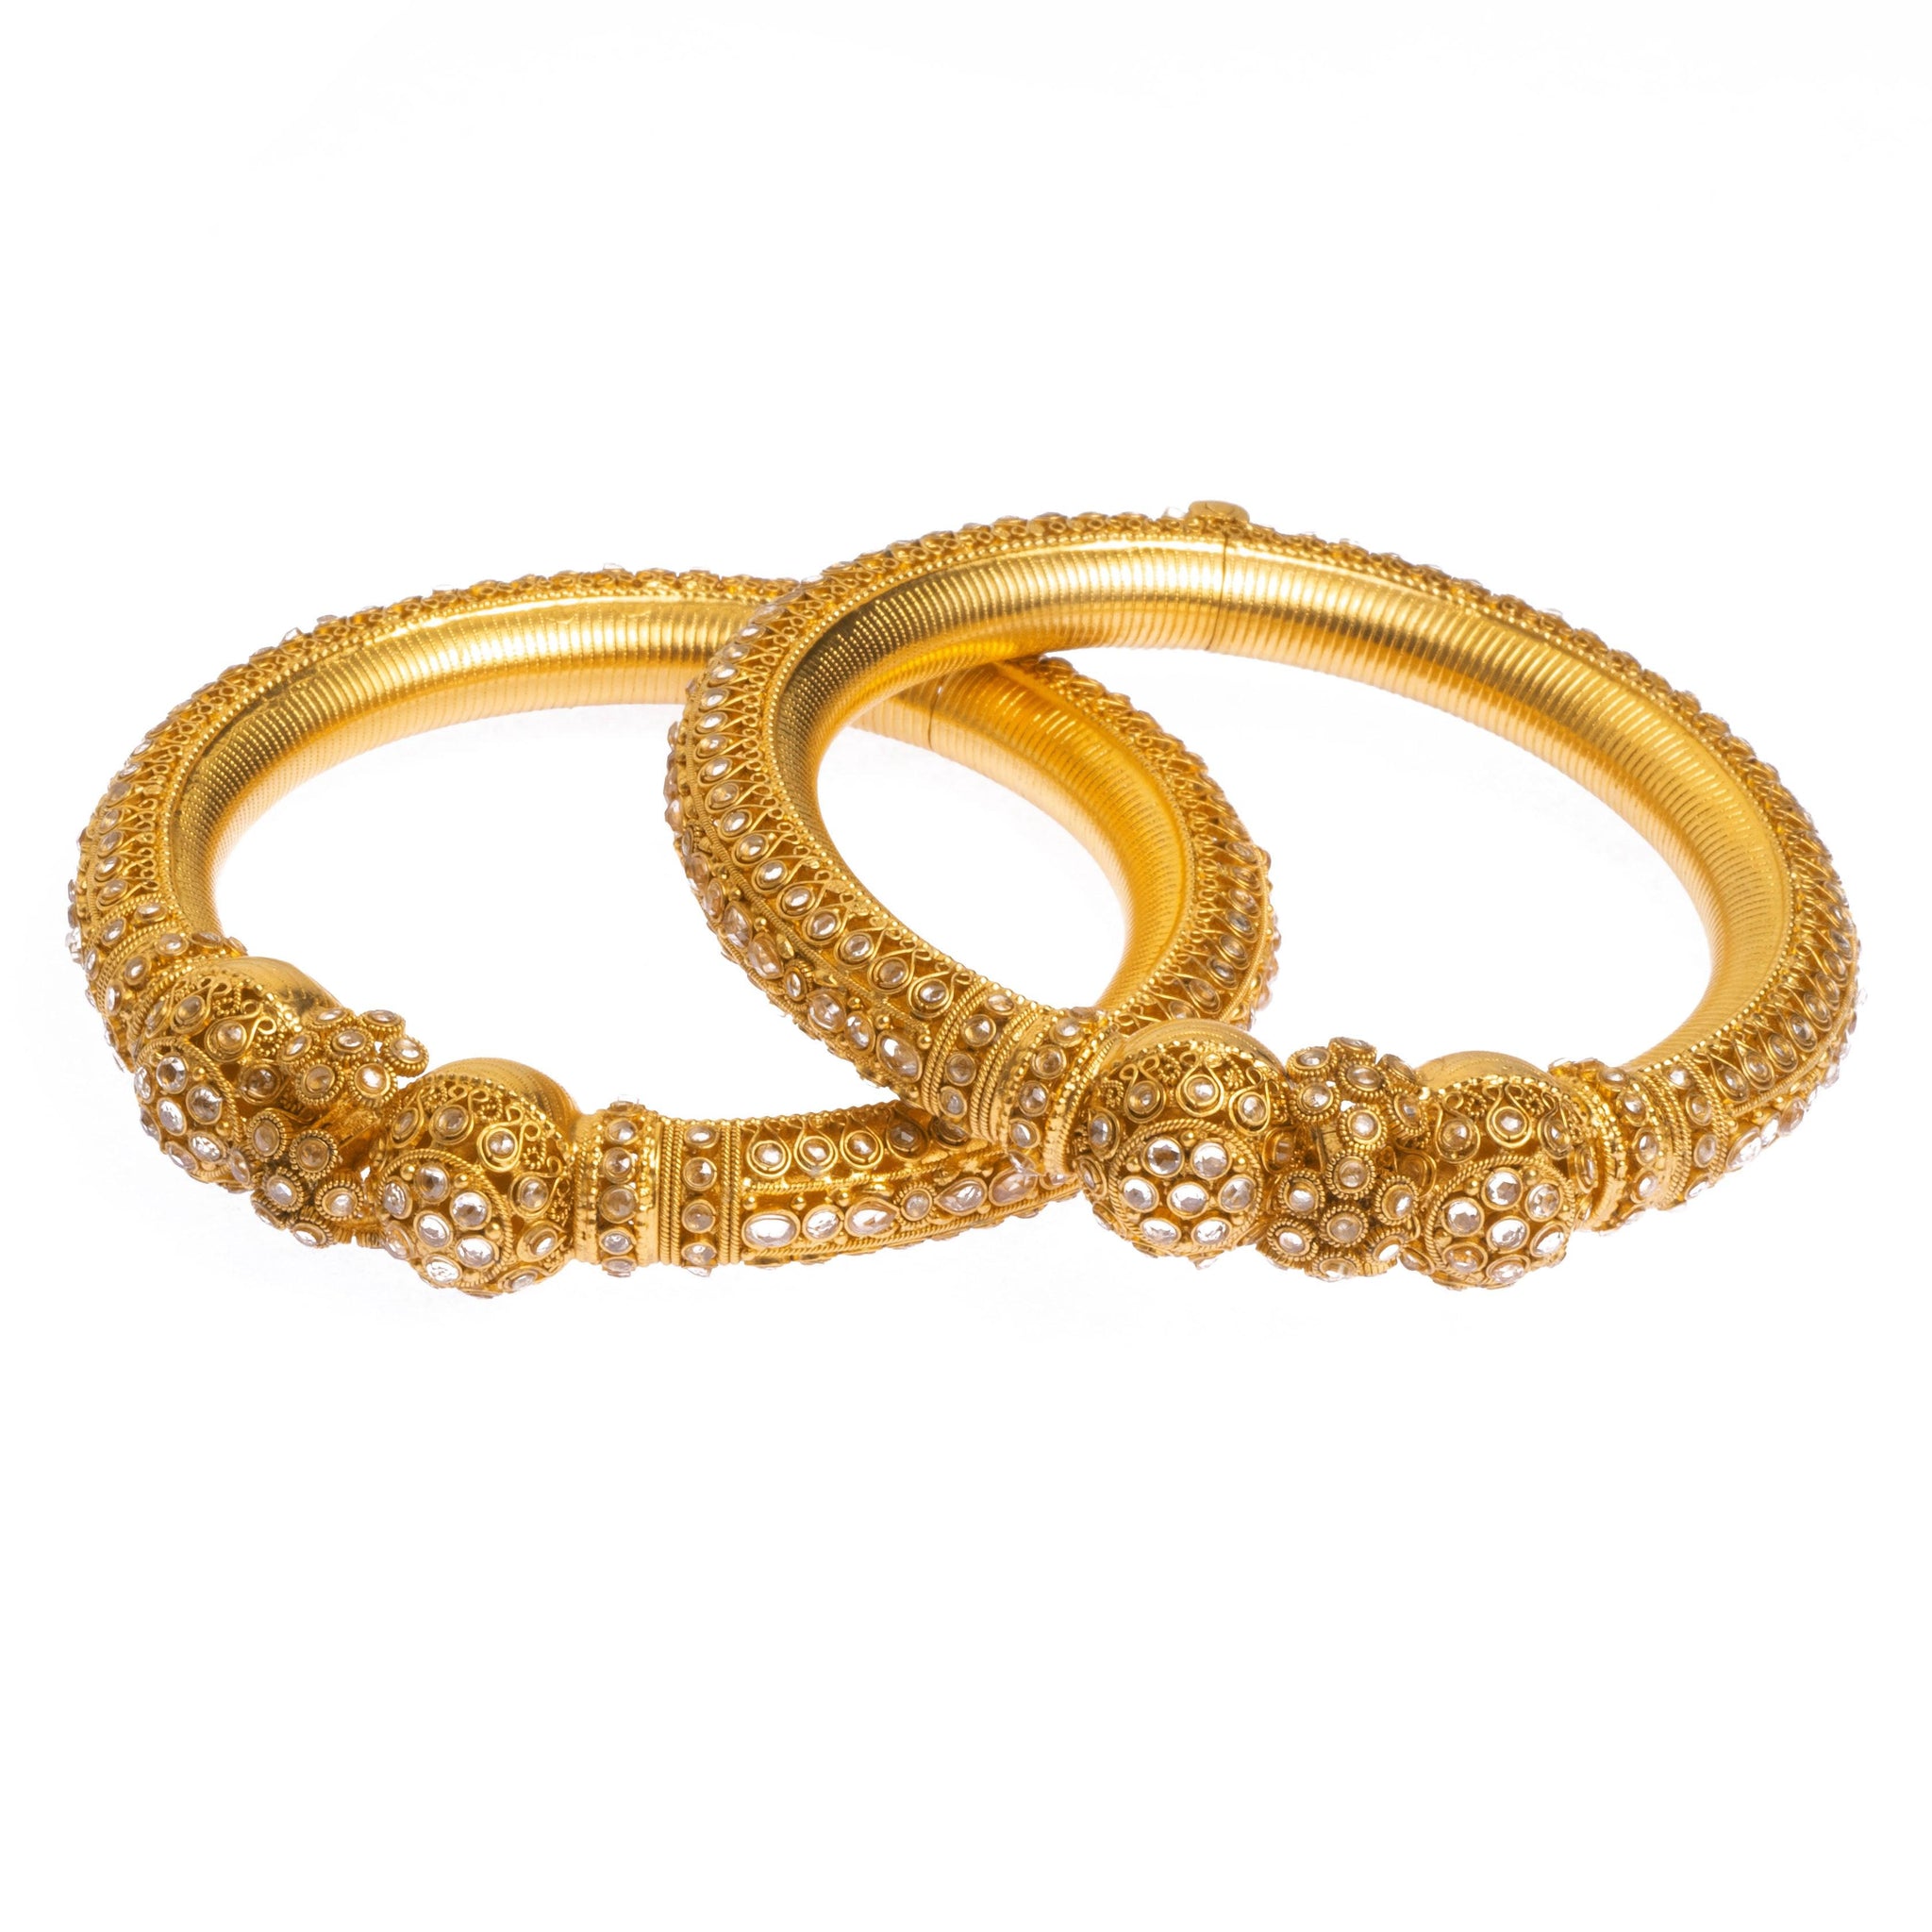 Pair of 22ct Gold Antiquated Look Openable Comfort Fit Bangles with Polki Style Stones B-8287